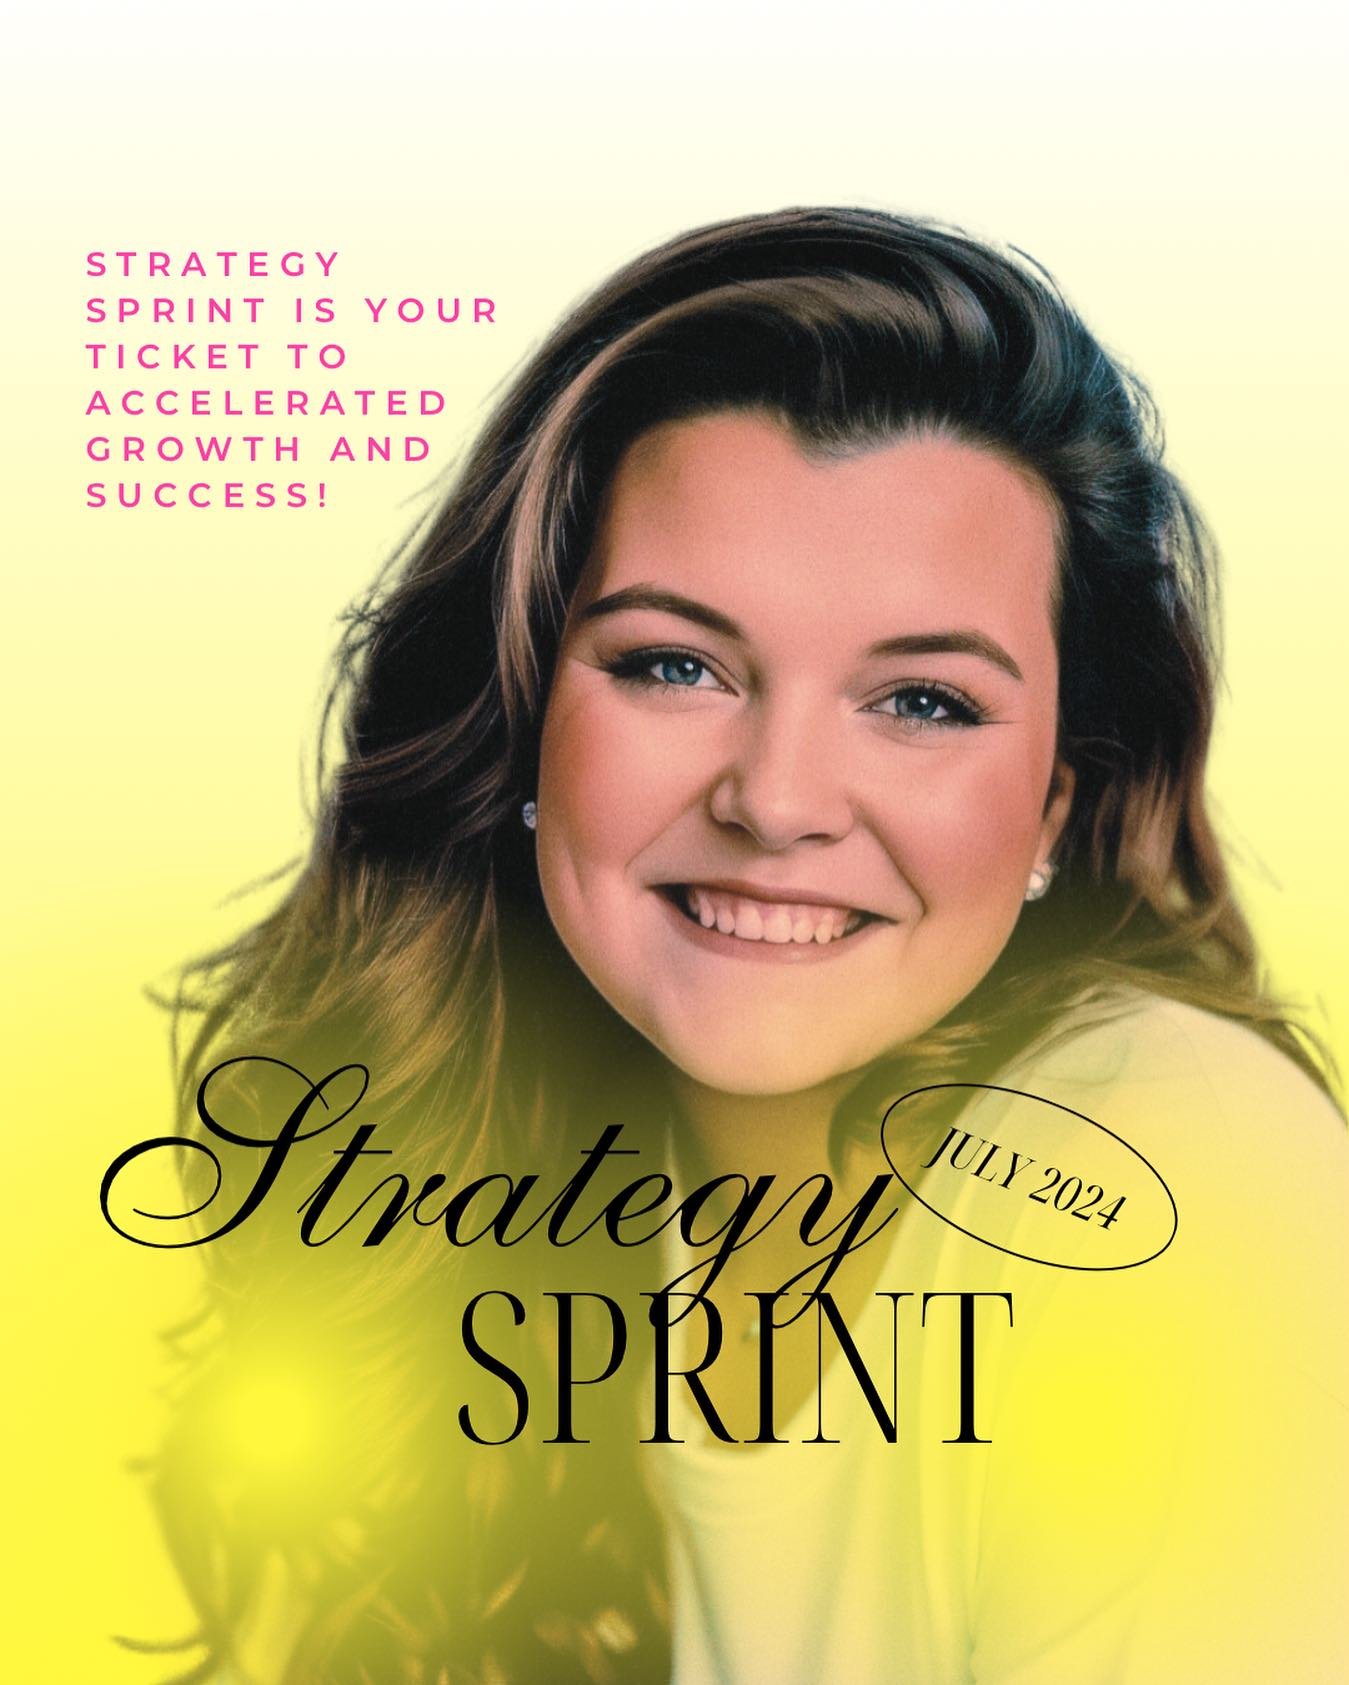 Ready, Set, Sprint! 🏃&zwj;♀️

The Strategy Sprint Waitlist is now open! 🔥

Are you ready to dive deep and transform your business in just 3 months? Our Strategy Sprint is designed to help you craft a strategy that fits your unique lifestyle, person